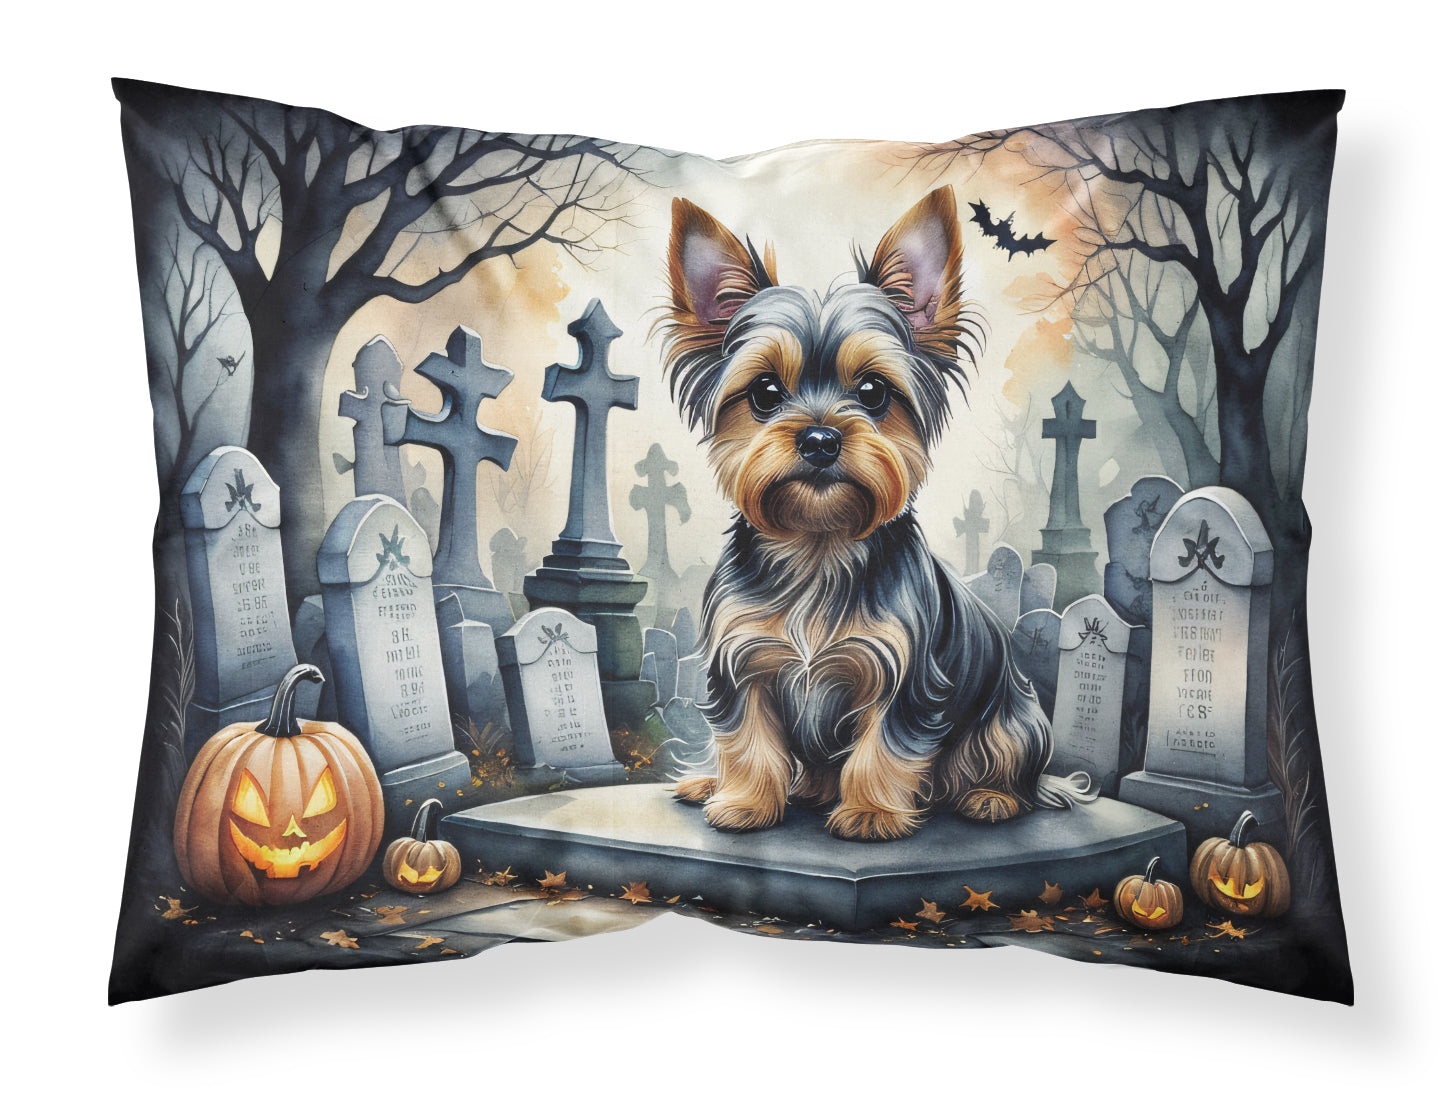 Buy this Yorkshire Terrier Spooky Halloween Fabric Standard Pillowcase